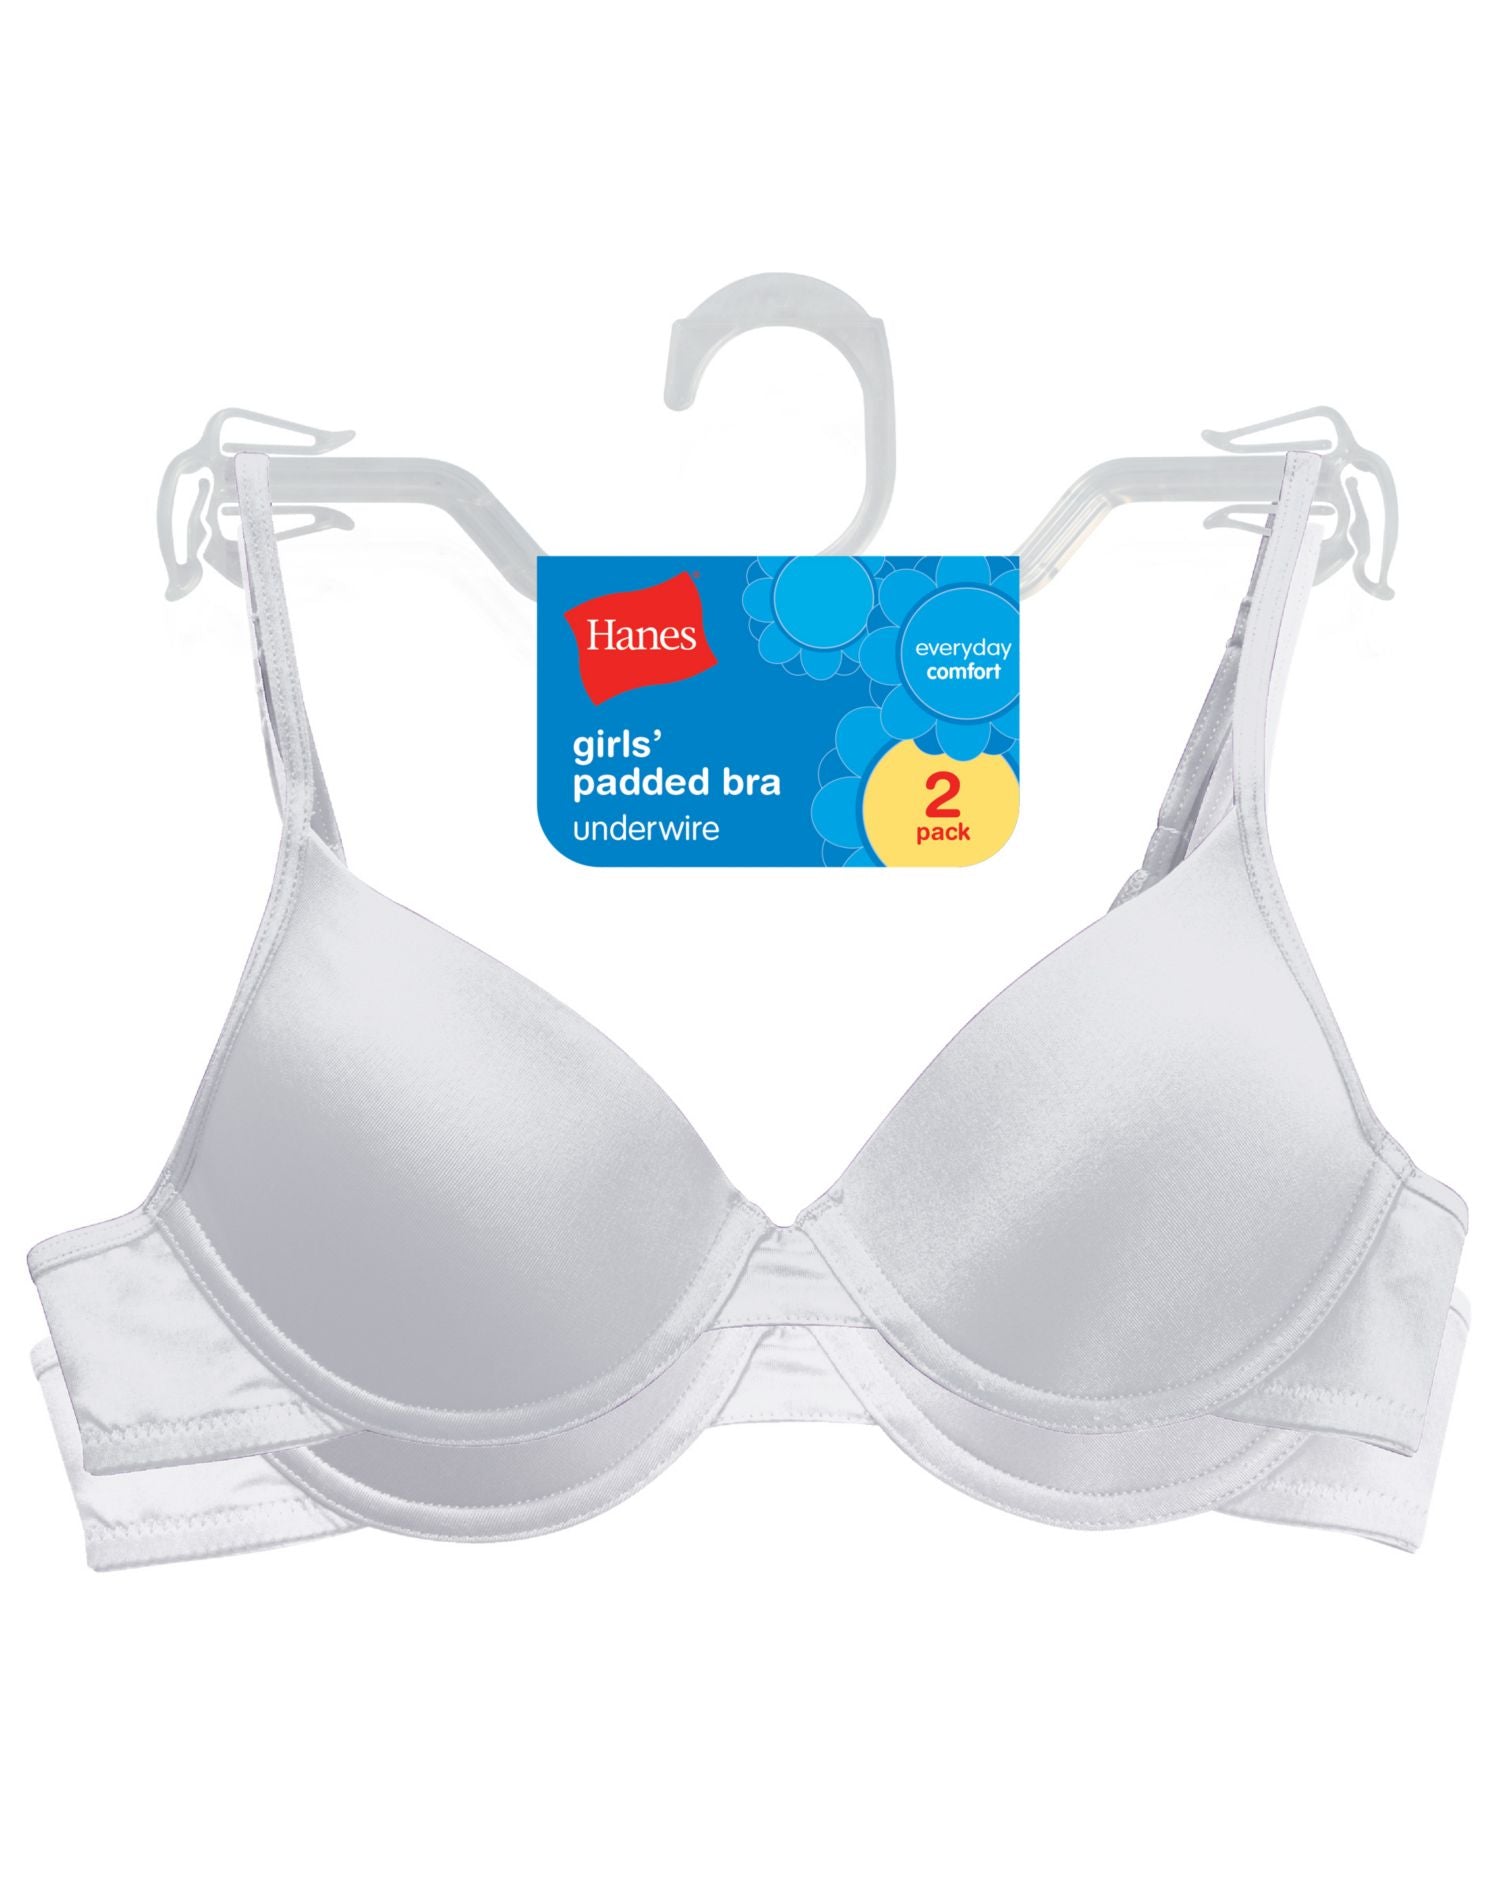 NWT Hanes Girls Padded Bras 3 pack size Medium solid pink, white